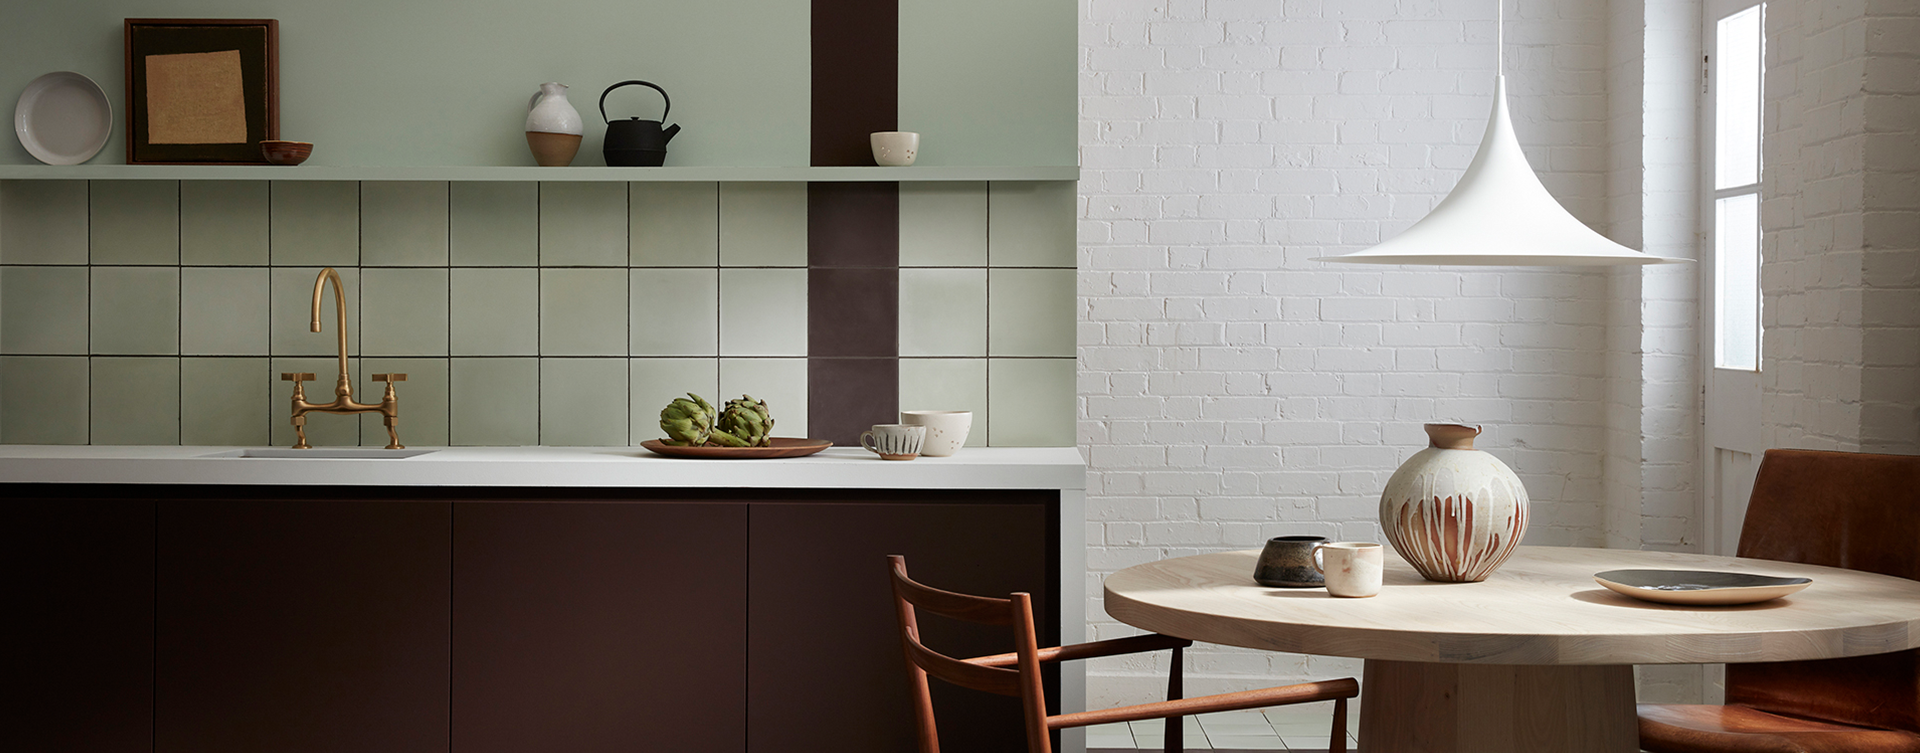 Little Greene Brown and Green Kitchen. - John Willox Kithen Design is a supplier of Little Greene Paint and Wallpaper.